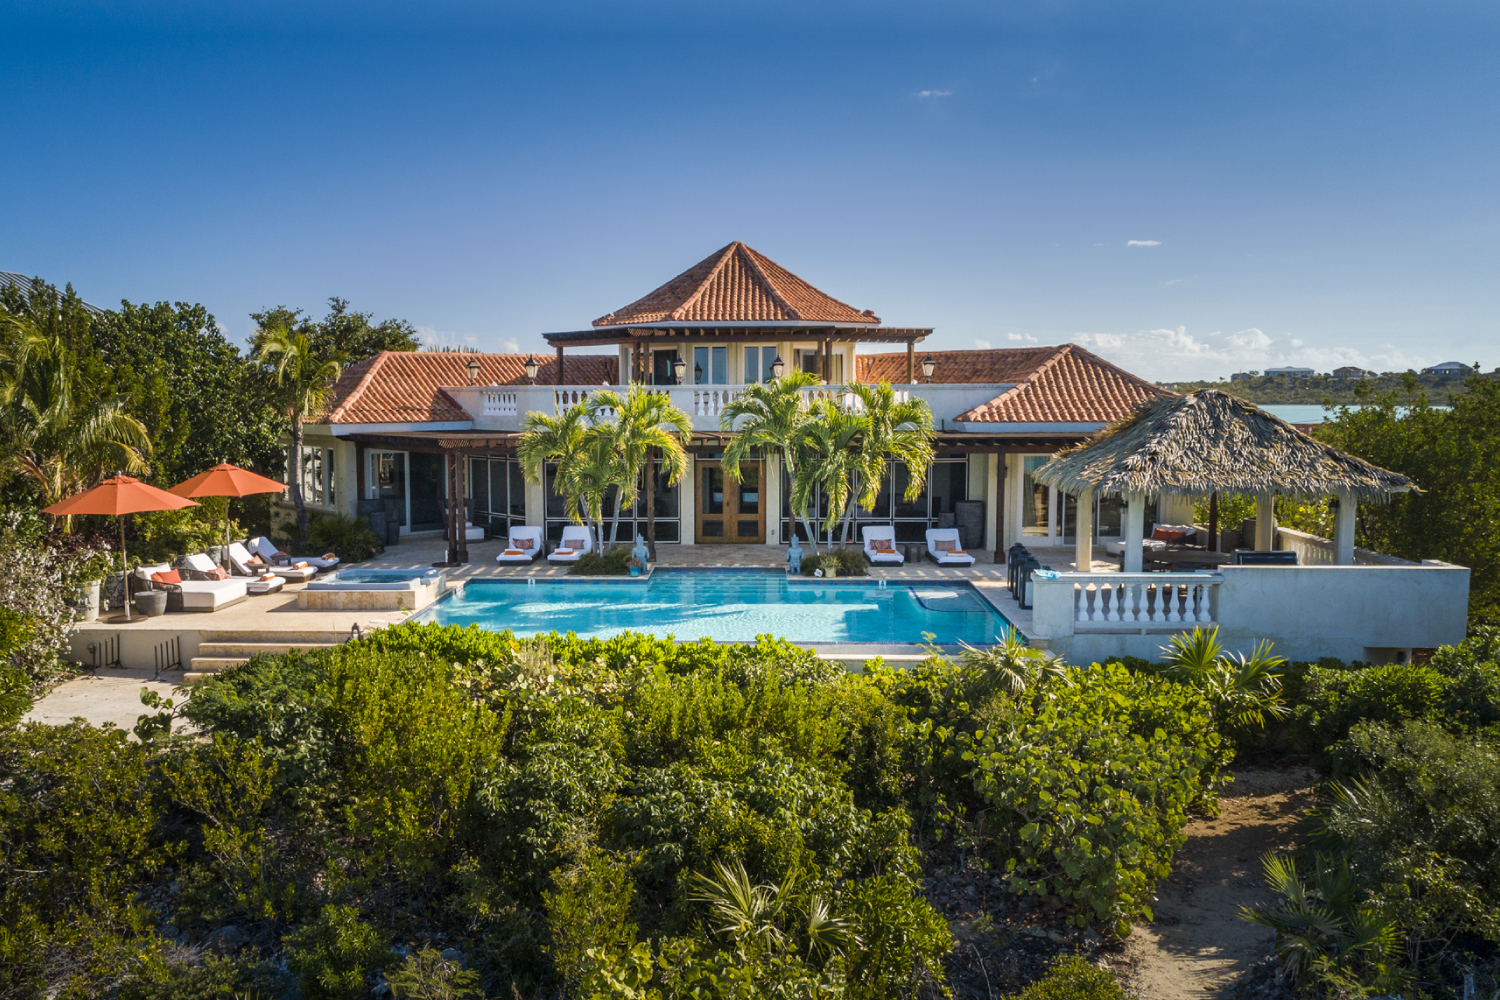 Welcome to the beautiful Villa Valentina.